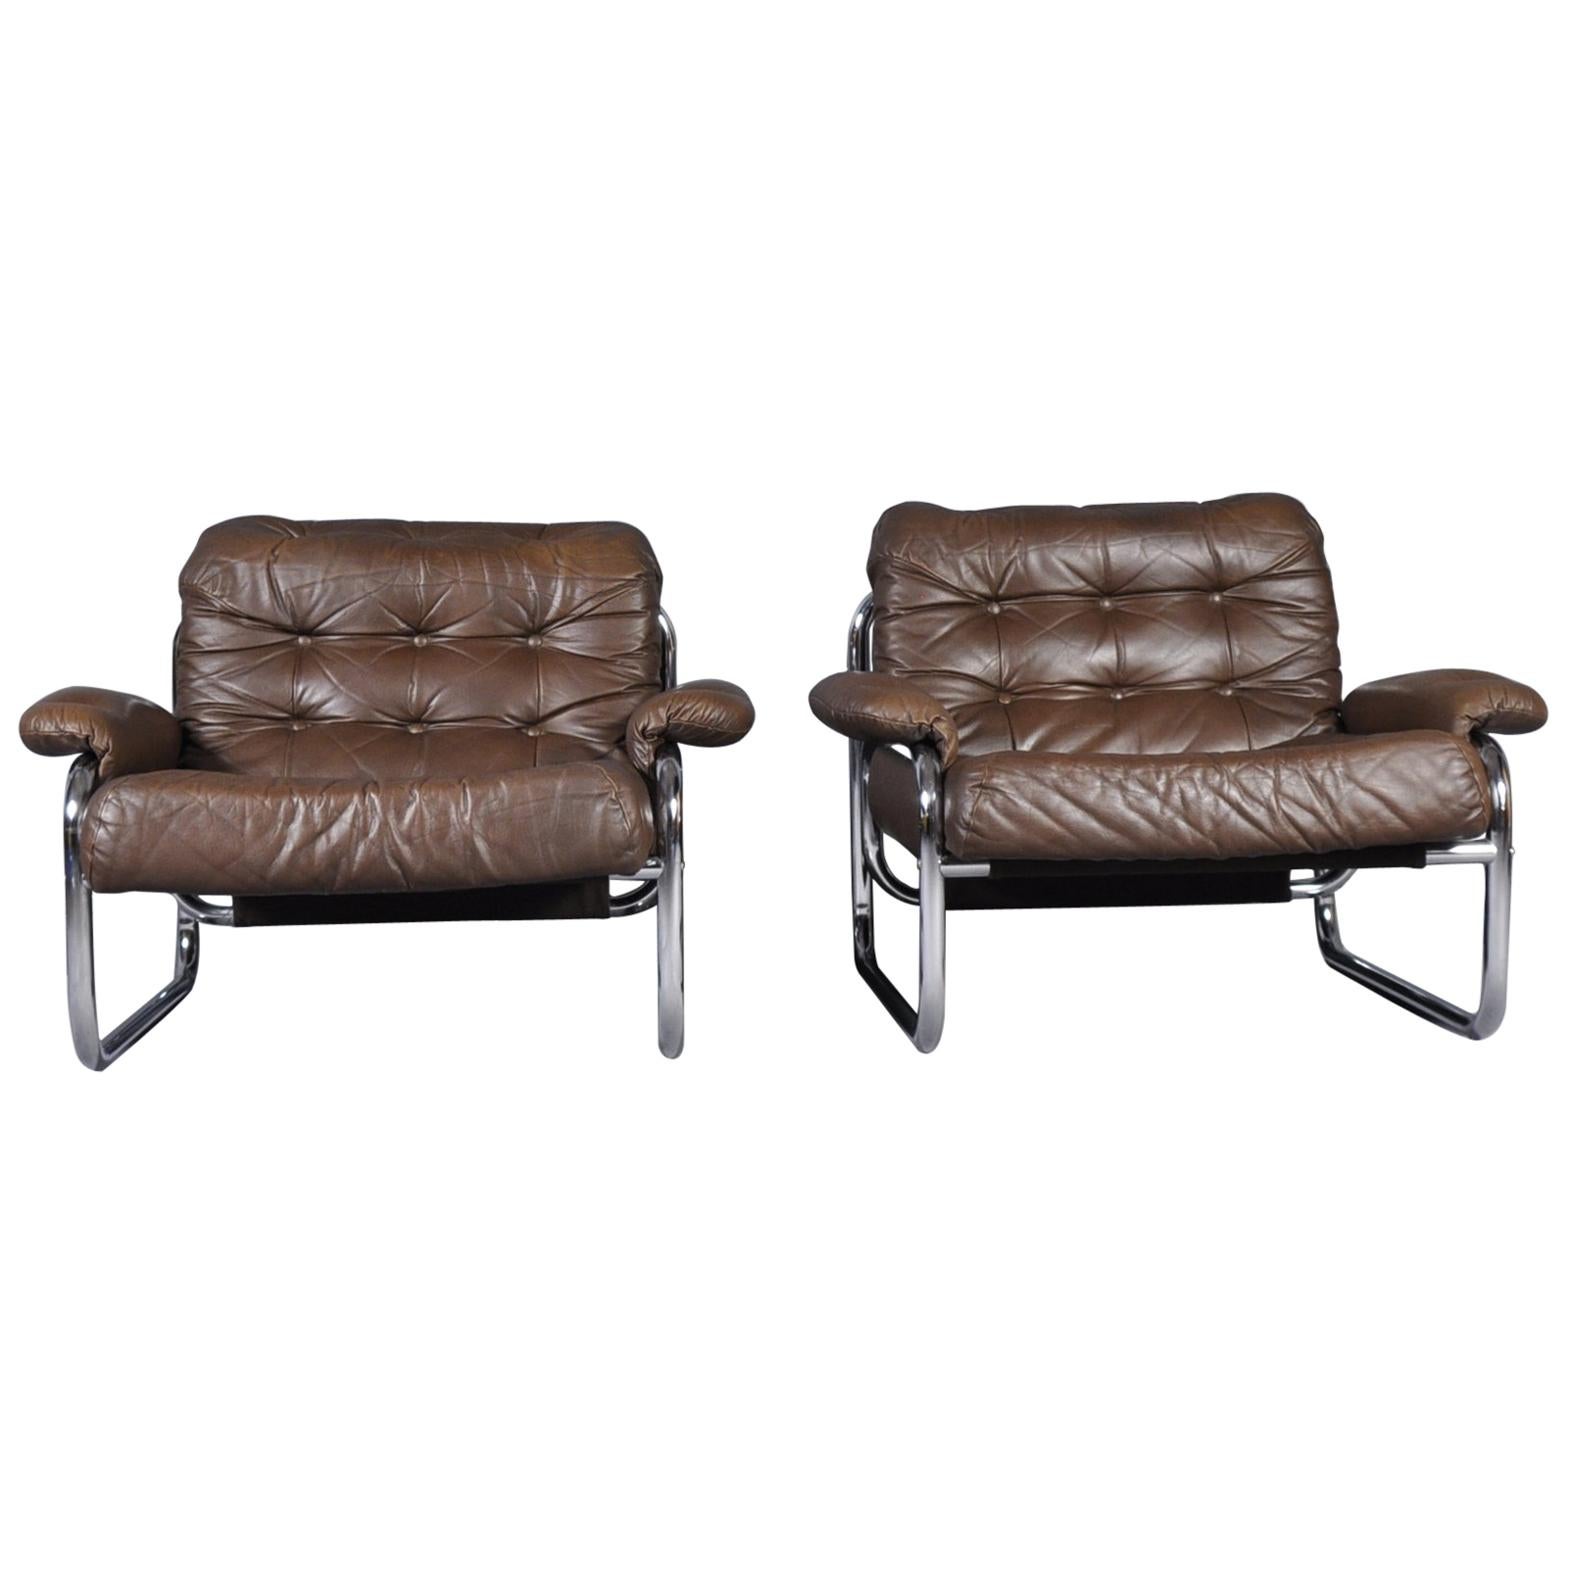 Pair of Johan Bertil Häggström for Ikea Leather Lounge Chairs, Sweden, 1970s